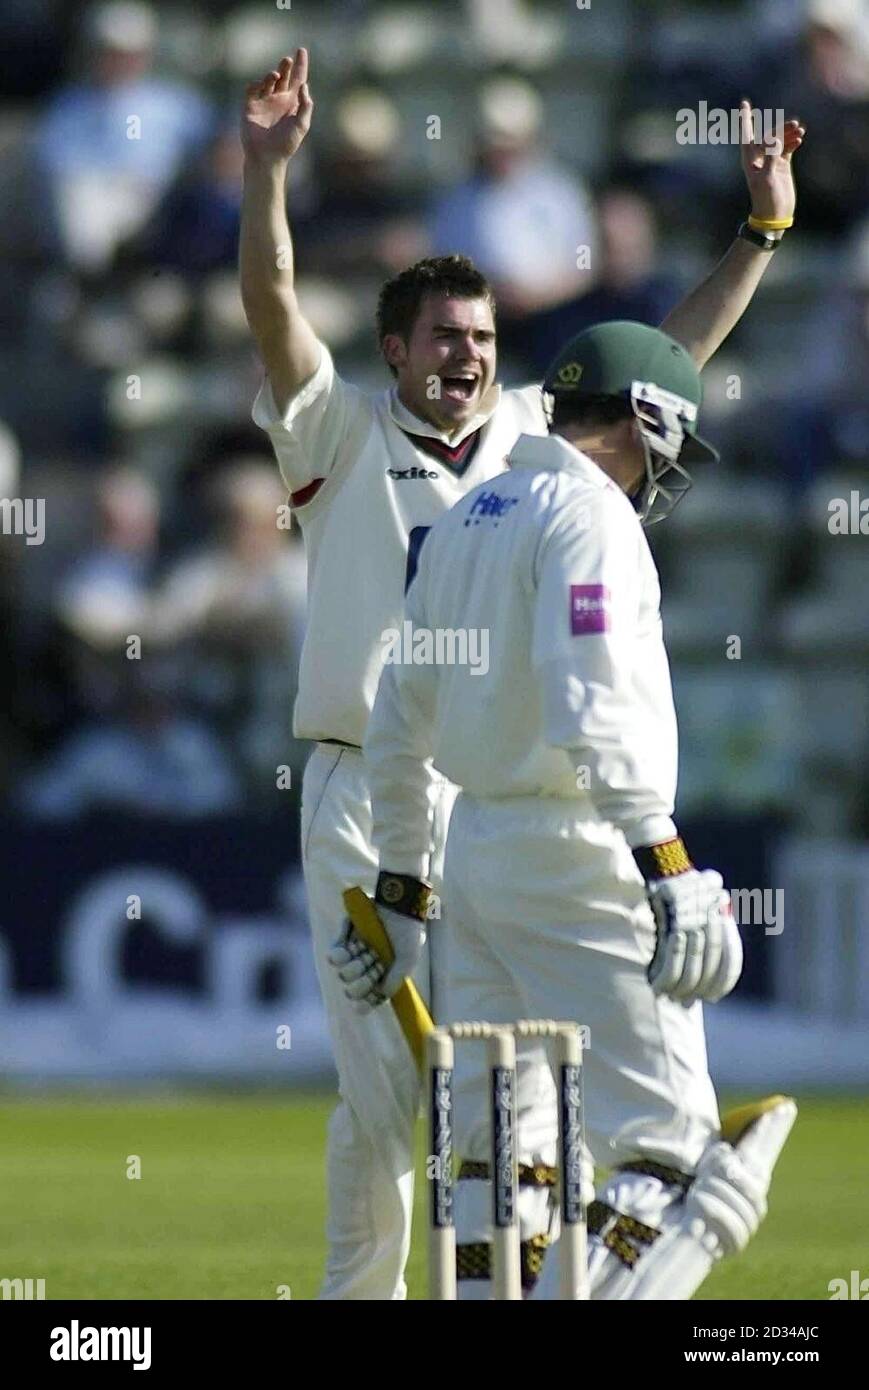 Lancashire bowler James Anderson celebrates having Worcestershire opening batsman Stephen Peters (not pictured) caught behind by Warren Hegg. Stock Photo